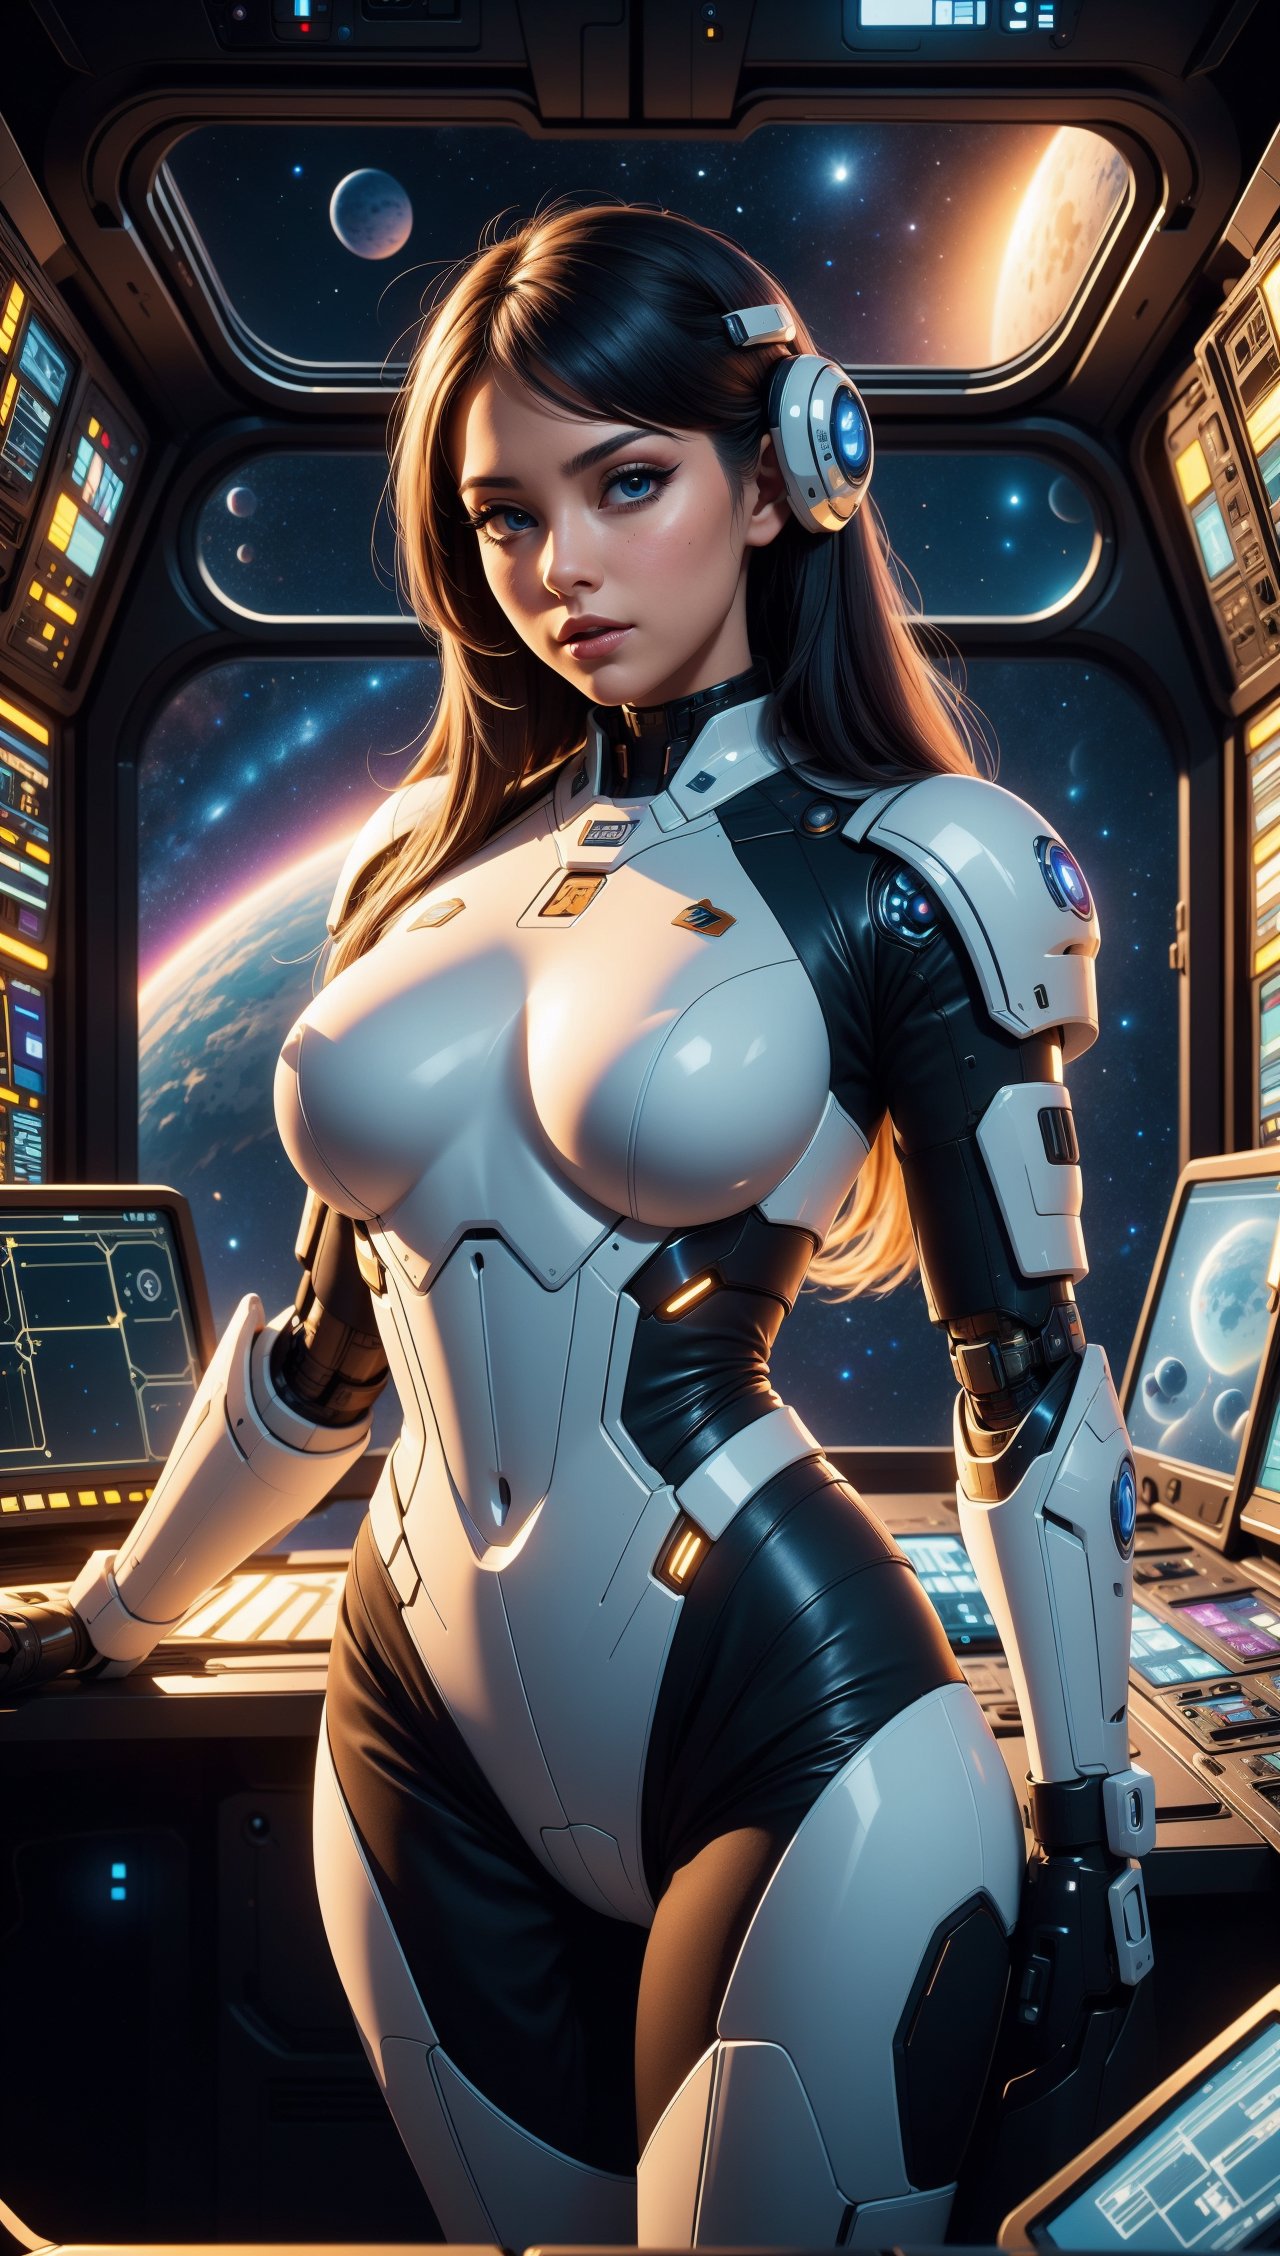 nsfw detailed realistic closeup portrait of pornstar Lil Rae Black, beautiful futuristic starship soldier in a sexy pose, deadly military mecha trooper, sexy cyberpunk armor, bare breasts, long black hair, looking at camera, space station nighttime setting, futuristic control room, deep space ship, background view of space 